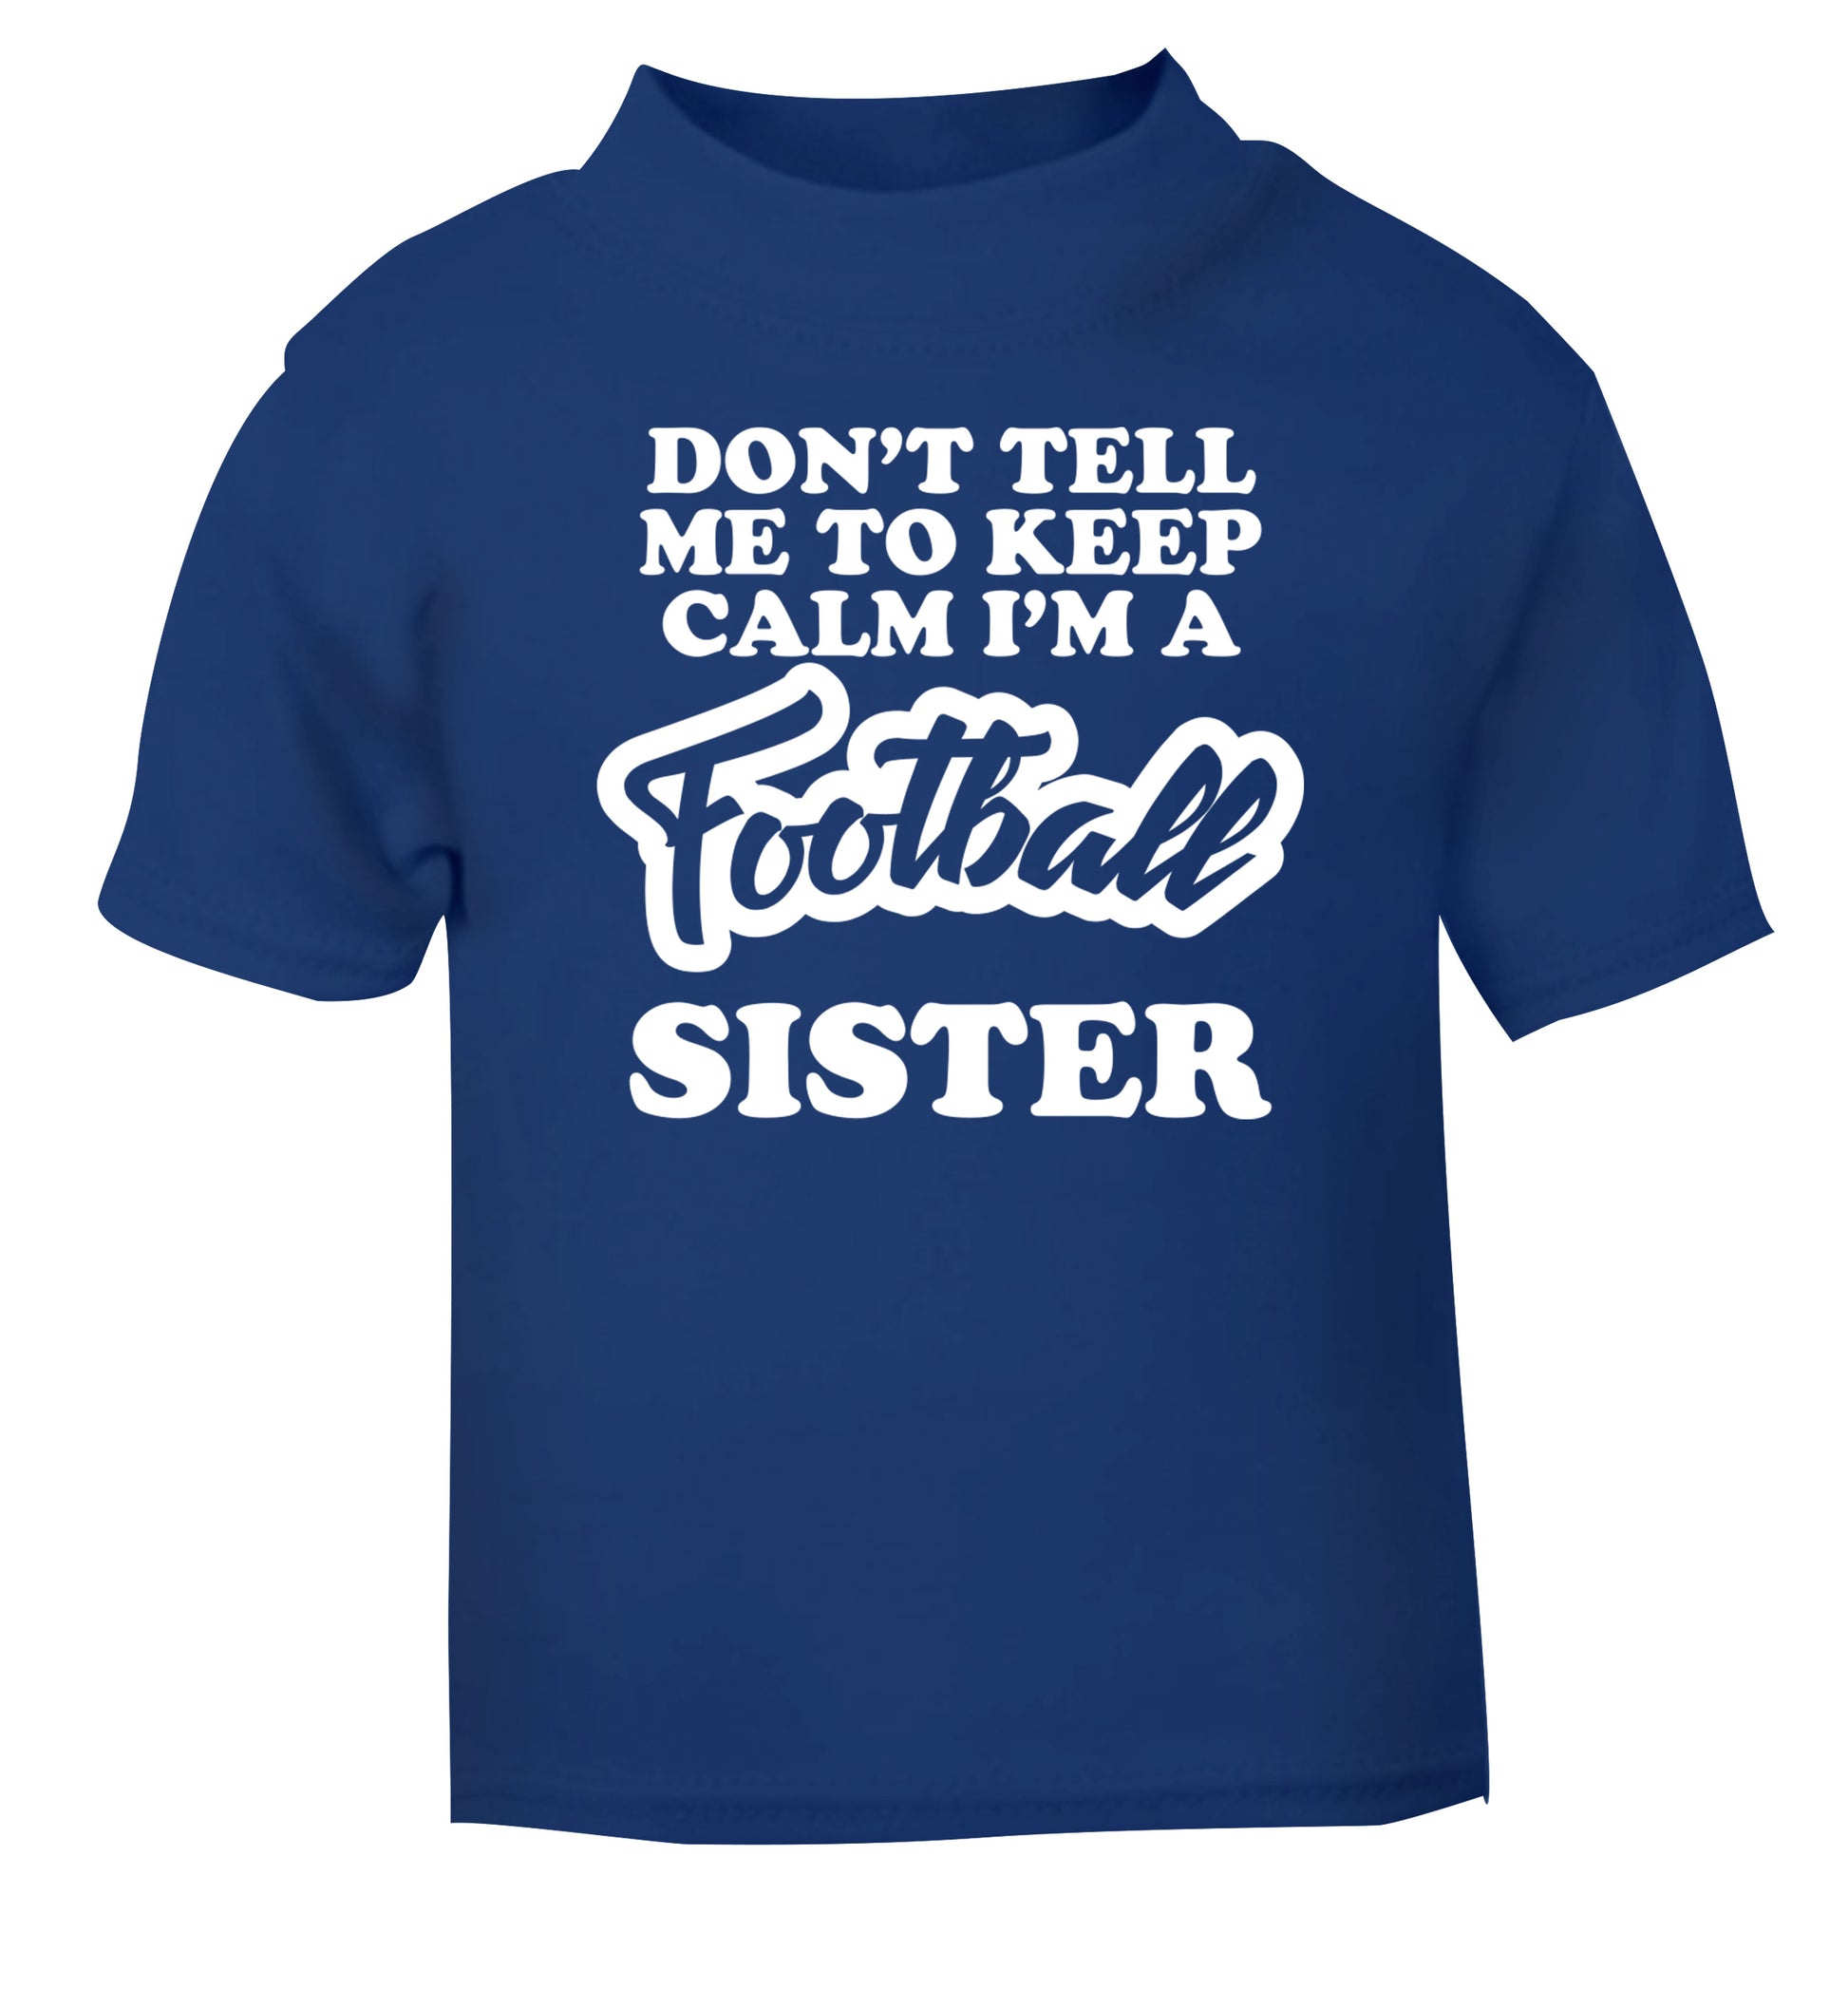 Don't tell me to keep calm I'm a football sister blue Baby Toddler Tshirt 2 Years